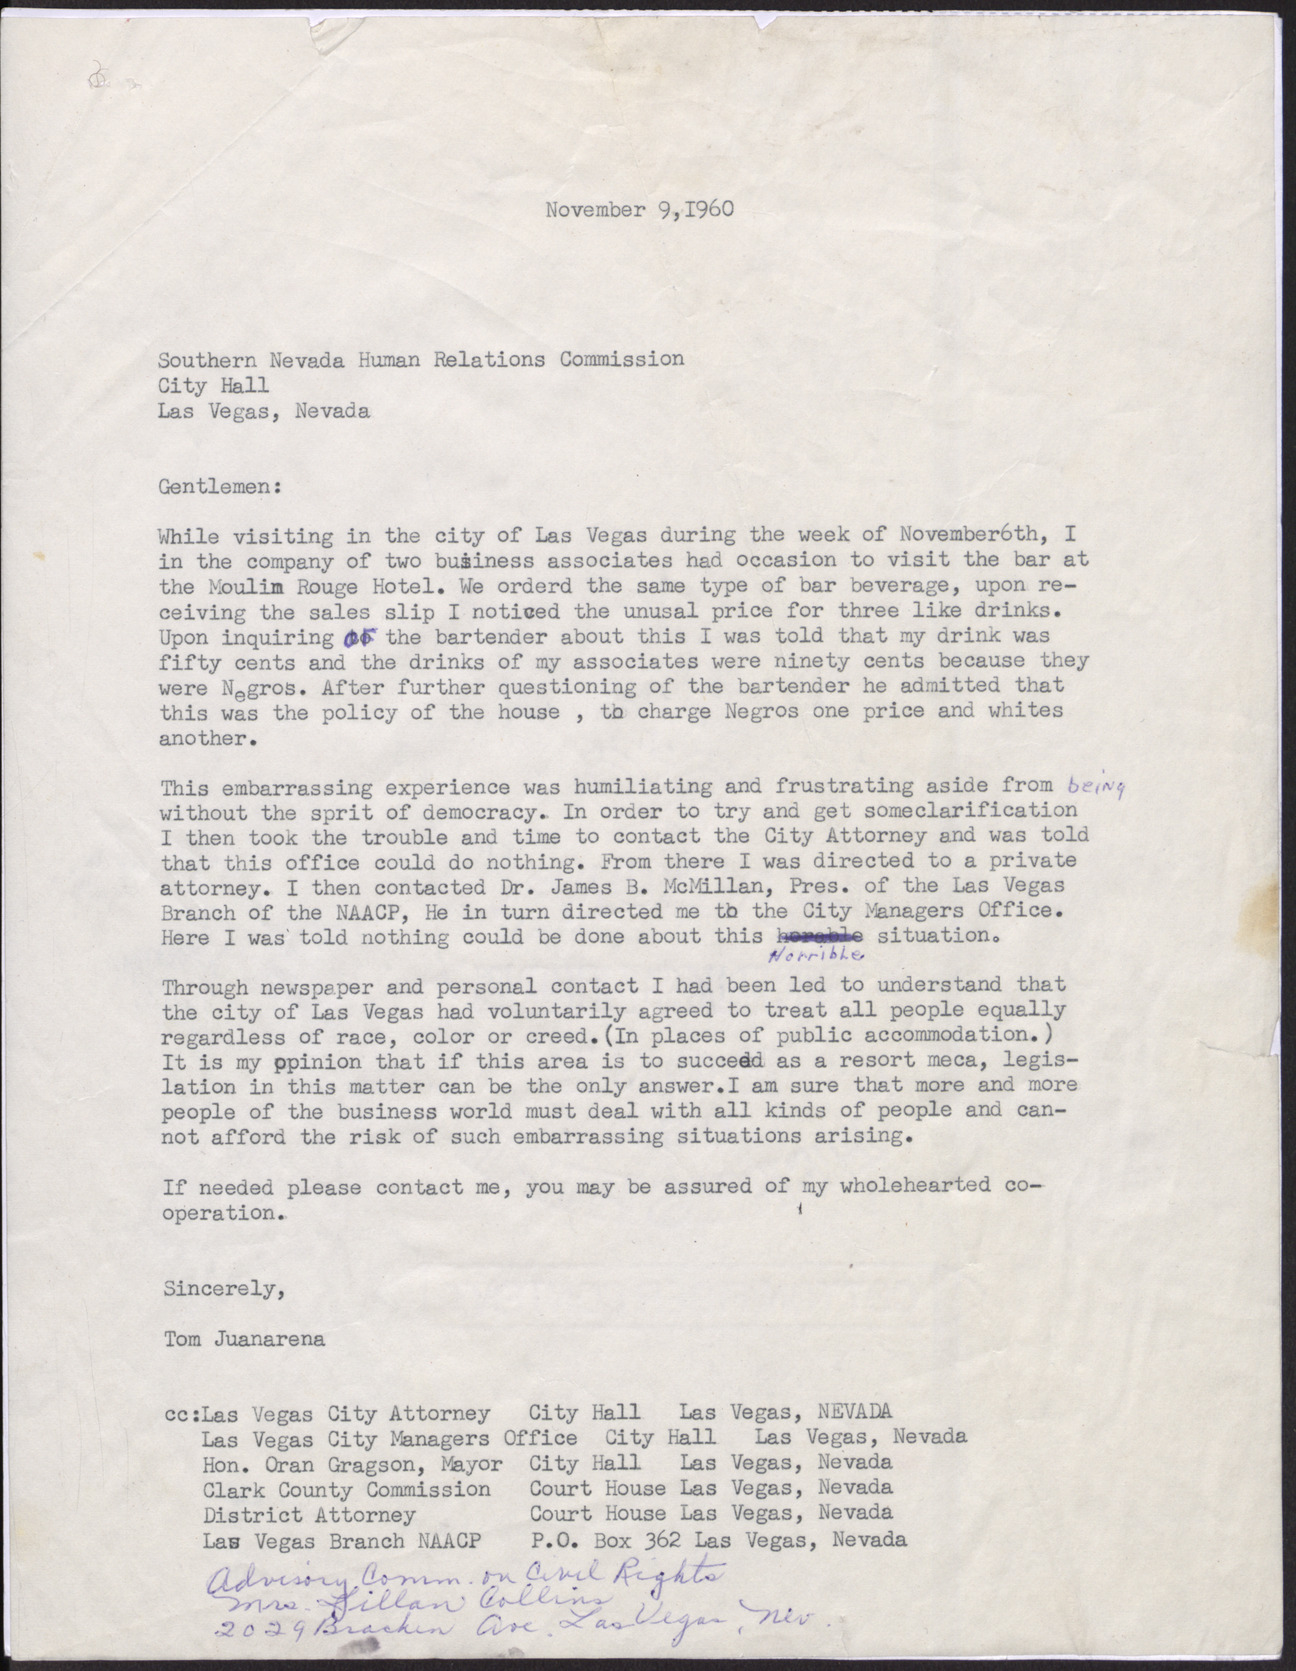 Letter to the Southern Nevada Human Relations Commission from Tom Juanarena, November 9, 1960